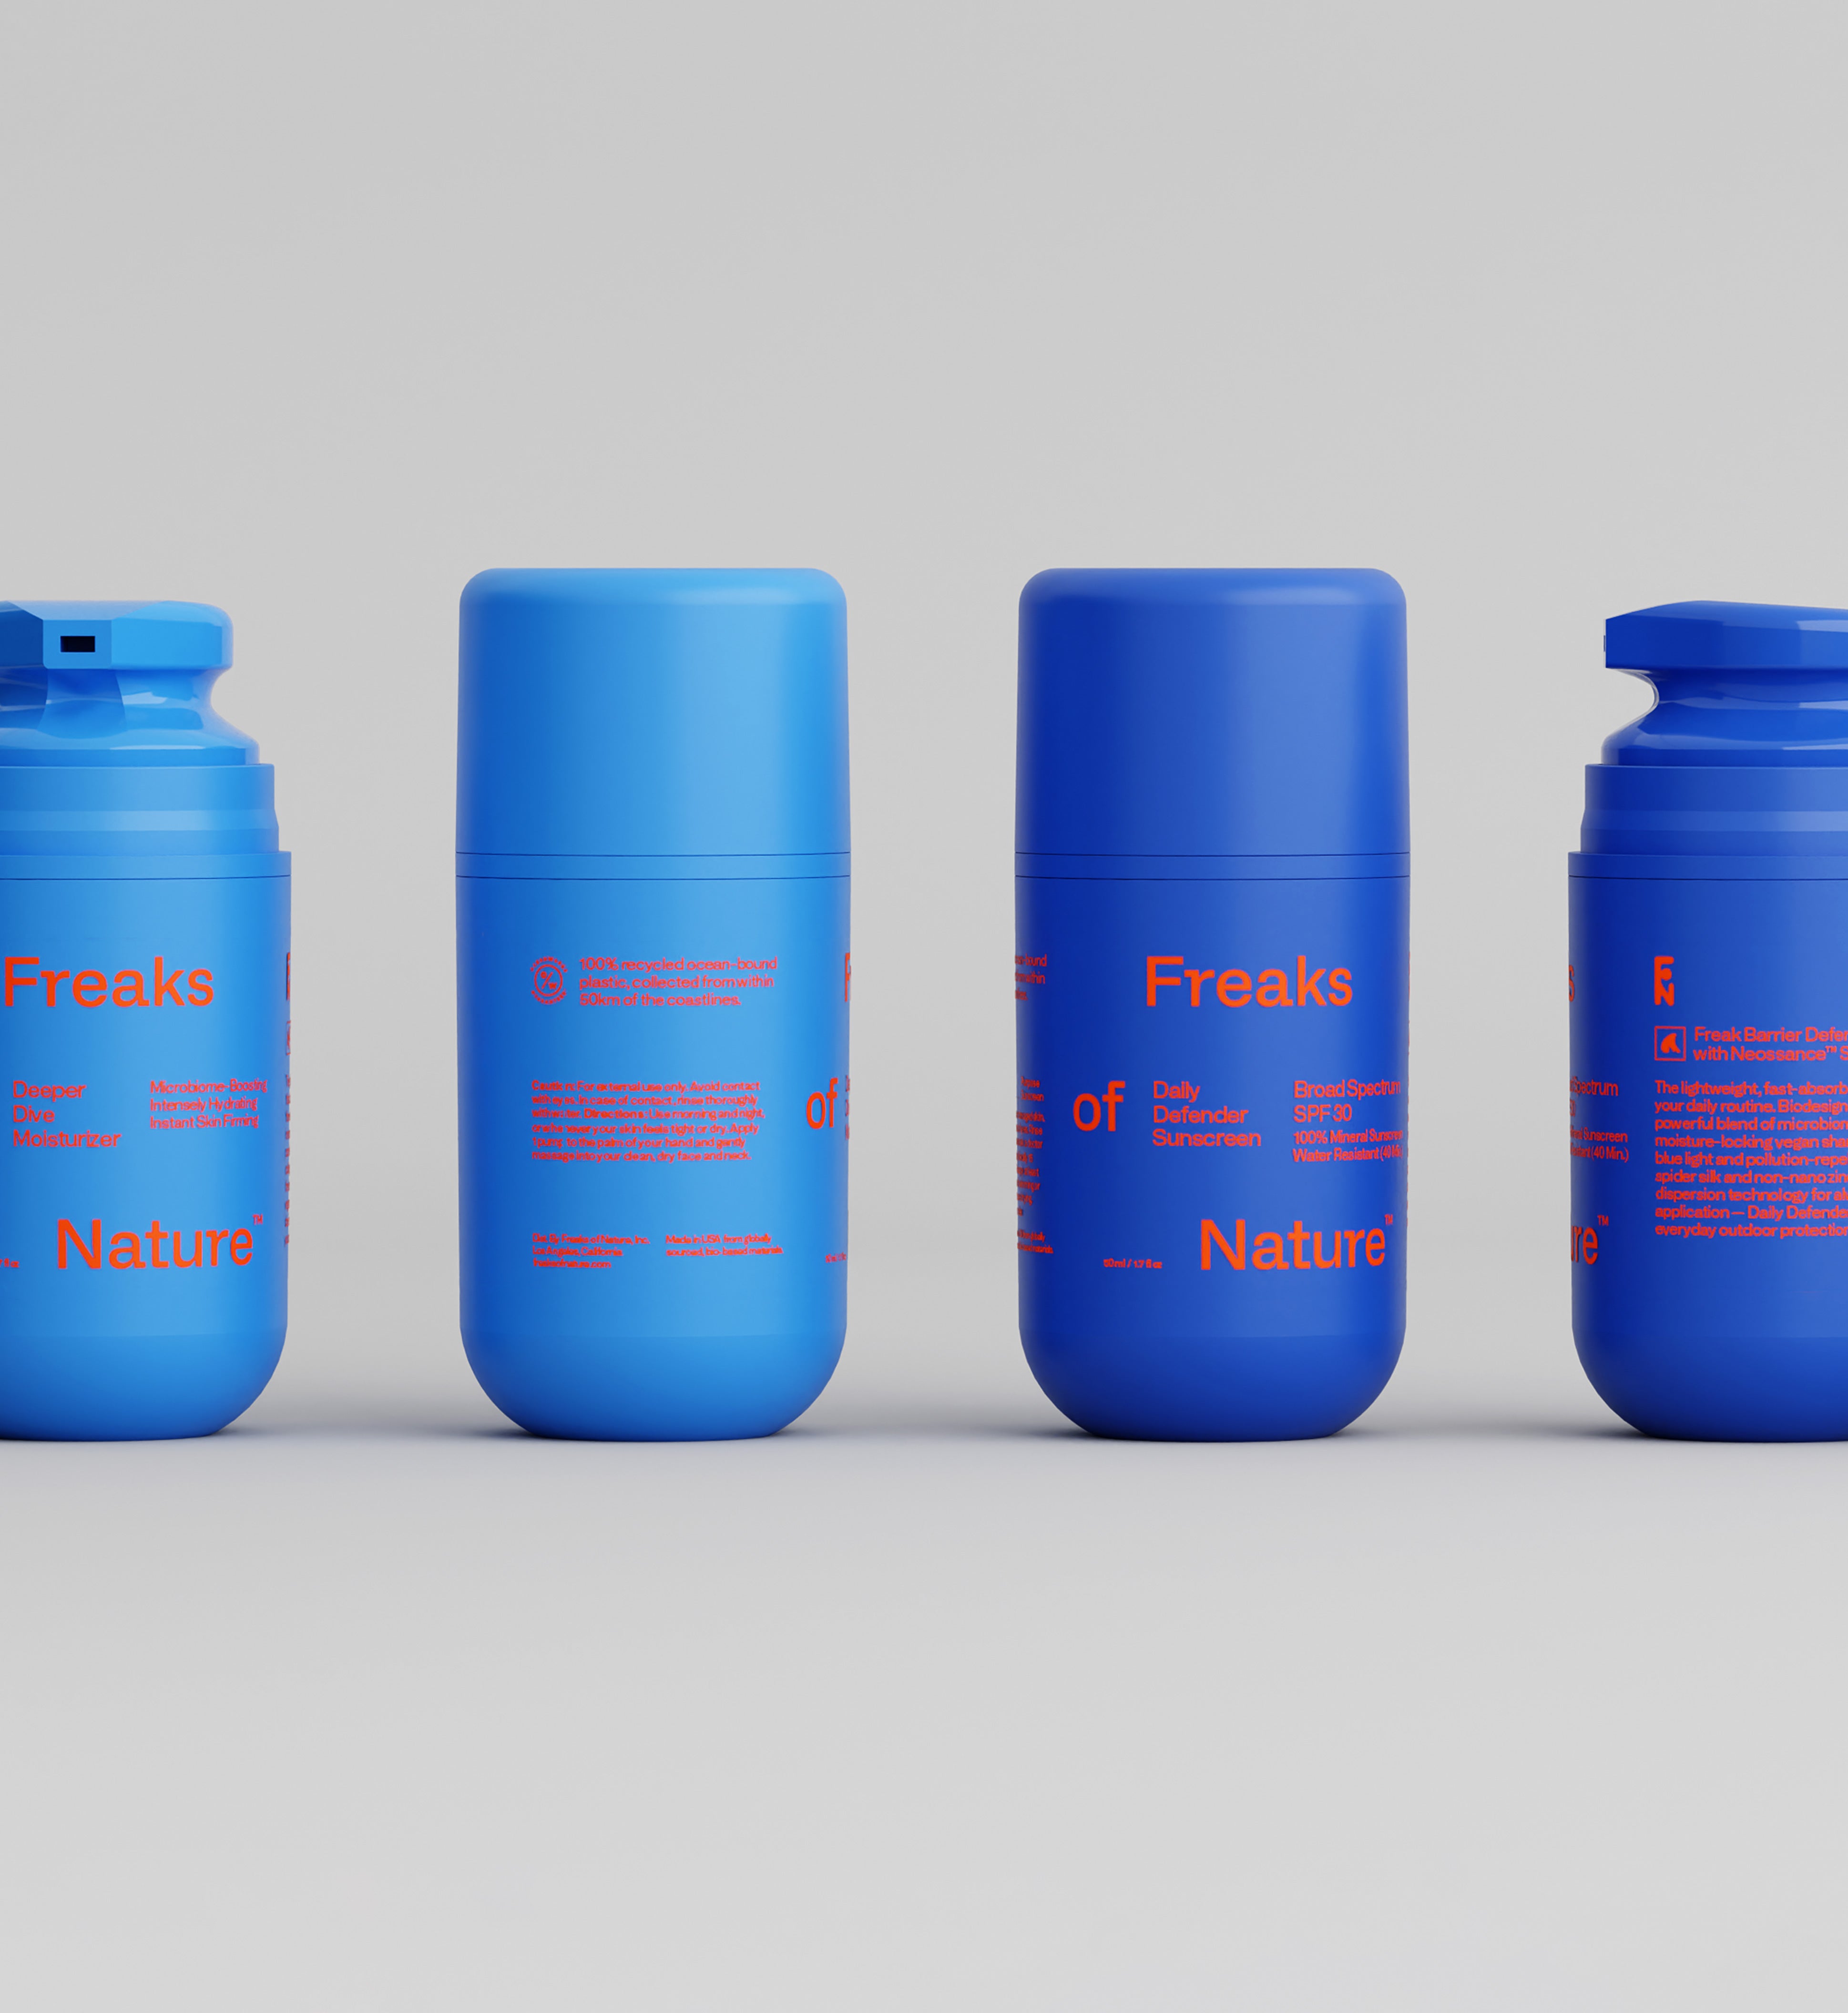 Four blue containers with "Freaks of Nature Skincare" printed on them in red text are displayed against a plain background. The containers, featuring Daily System with SPF30 Sunscreen and Deeper Dive Moisturizer Serum Gel with vegan Squalane, vary in lid styles, including flip-top and twist-on/off lids, and are arranged in a row. Additional text appears in smaller red font.